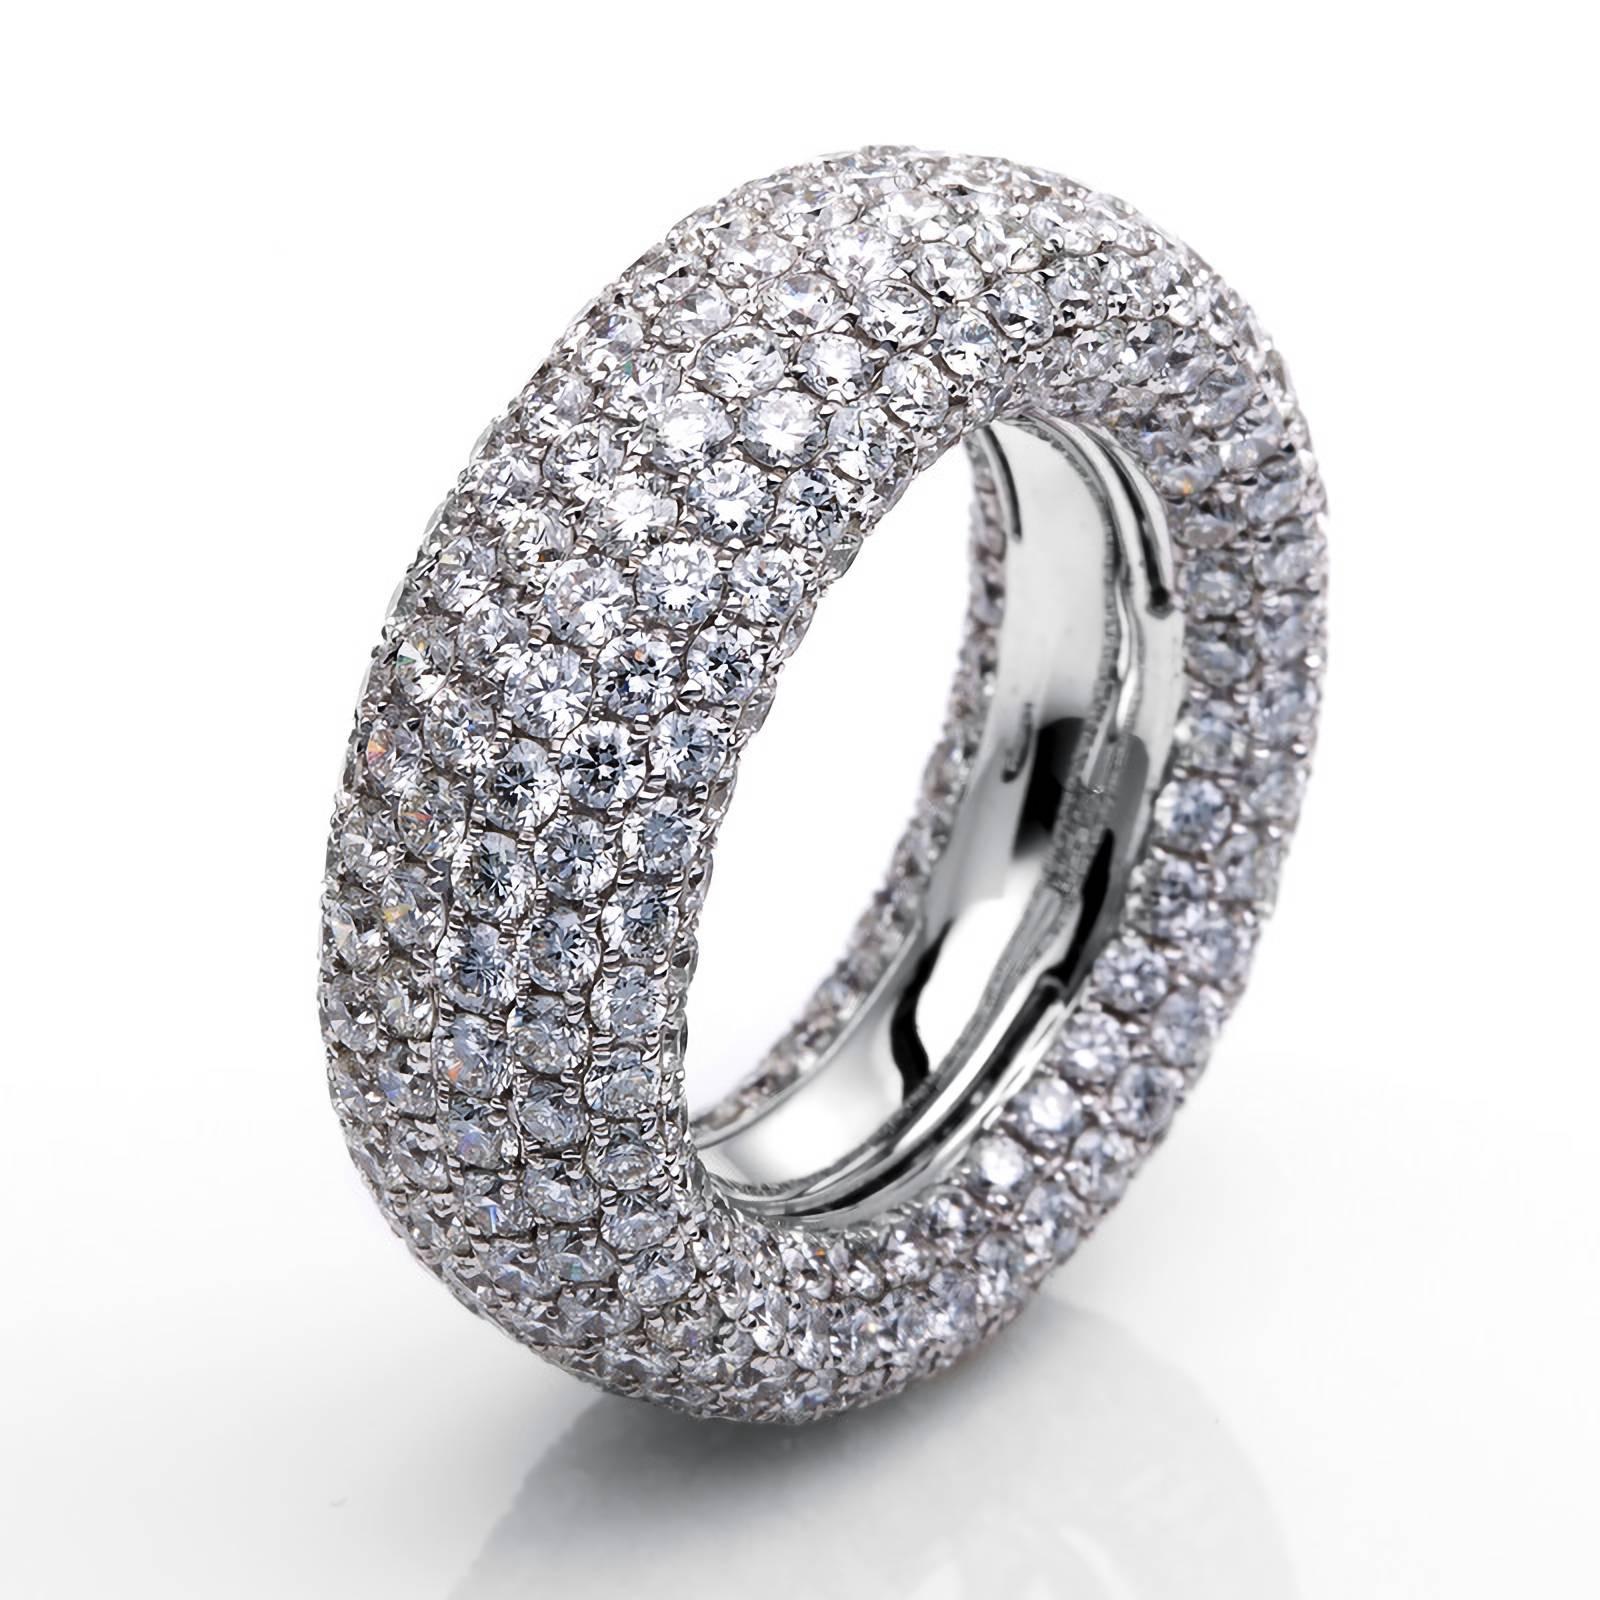 The meticulous craftsmanship of our artisans will shine a light on your great taste and unique style when wearing this stunning 18k White Gold Diamond Ring with 386 sparkling brilliant-cut diamonds.

You are used to the highest standards of quality